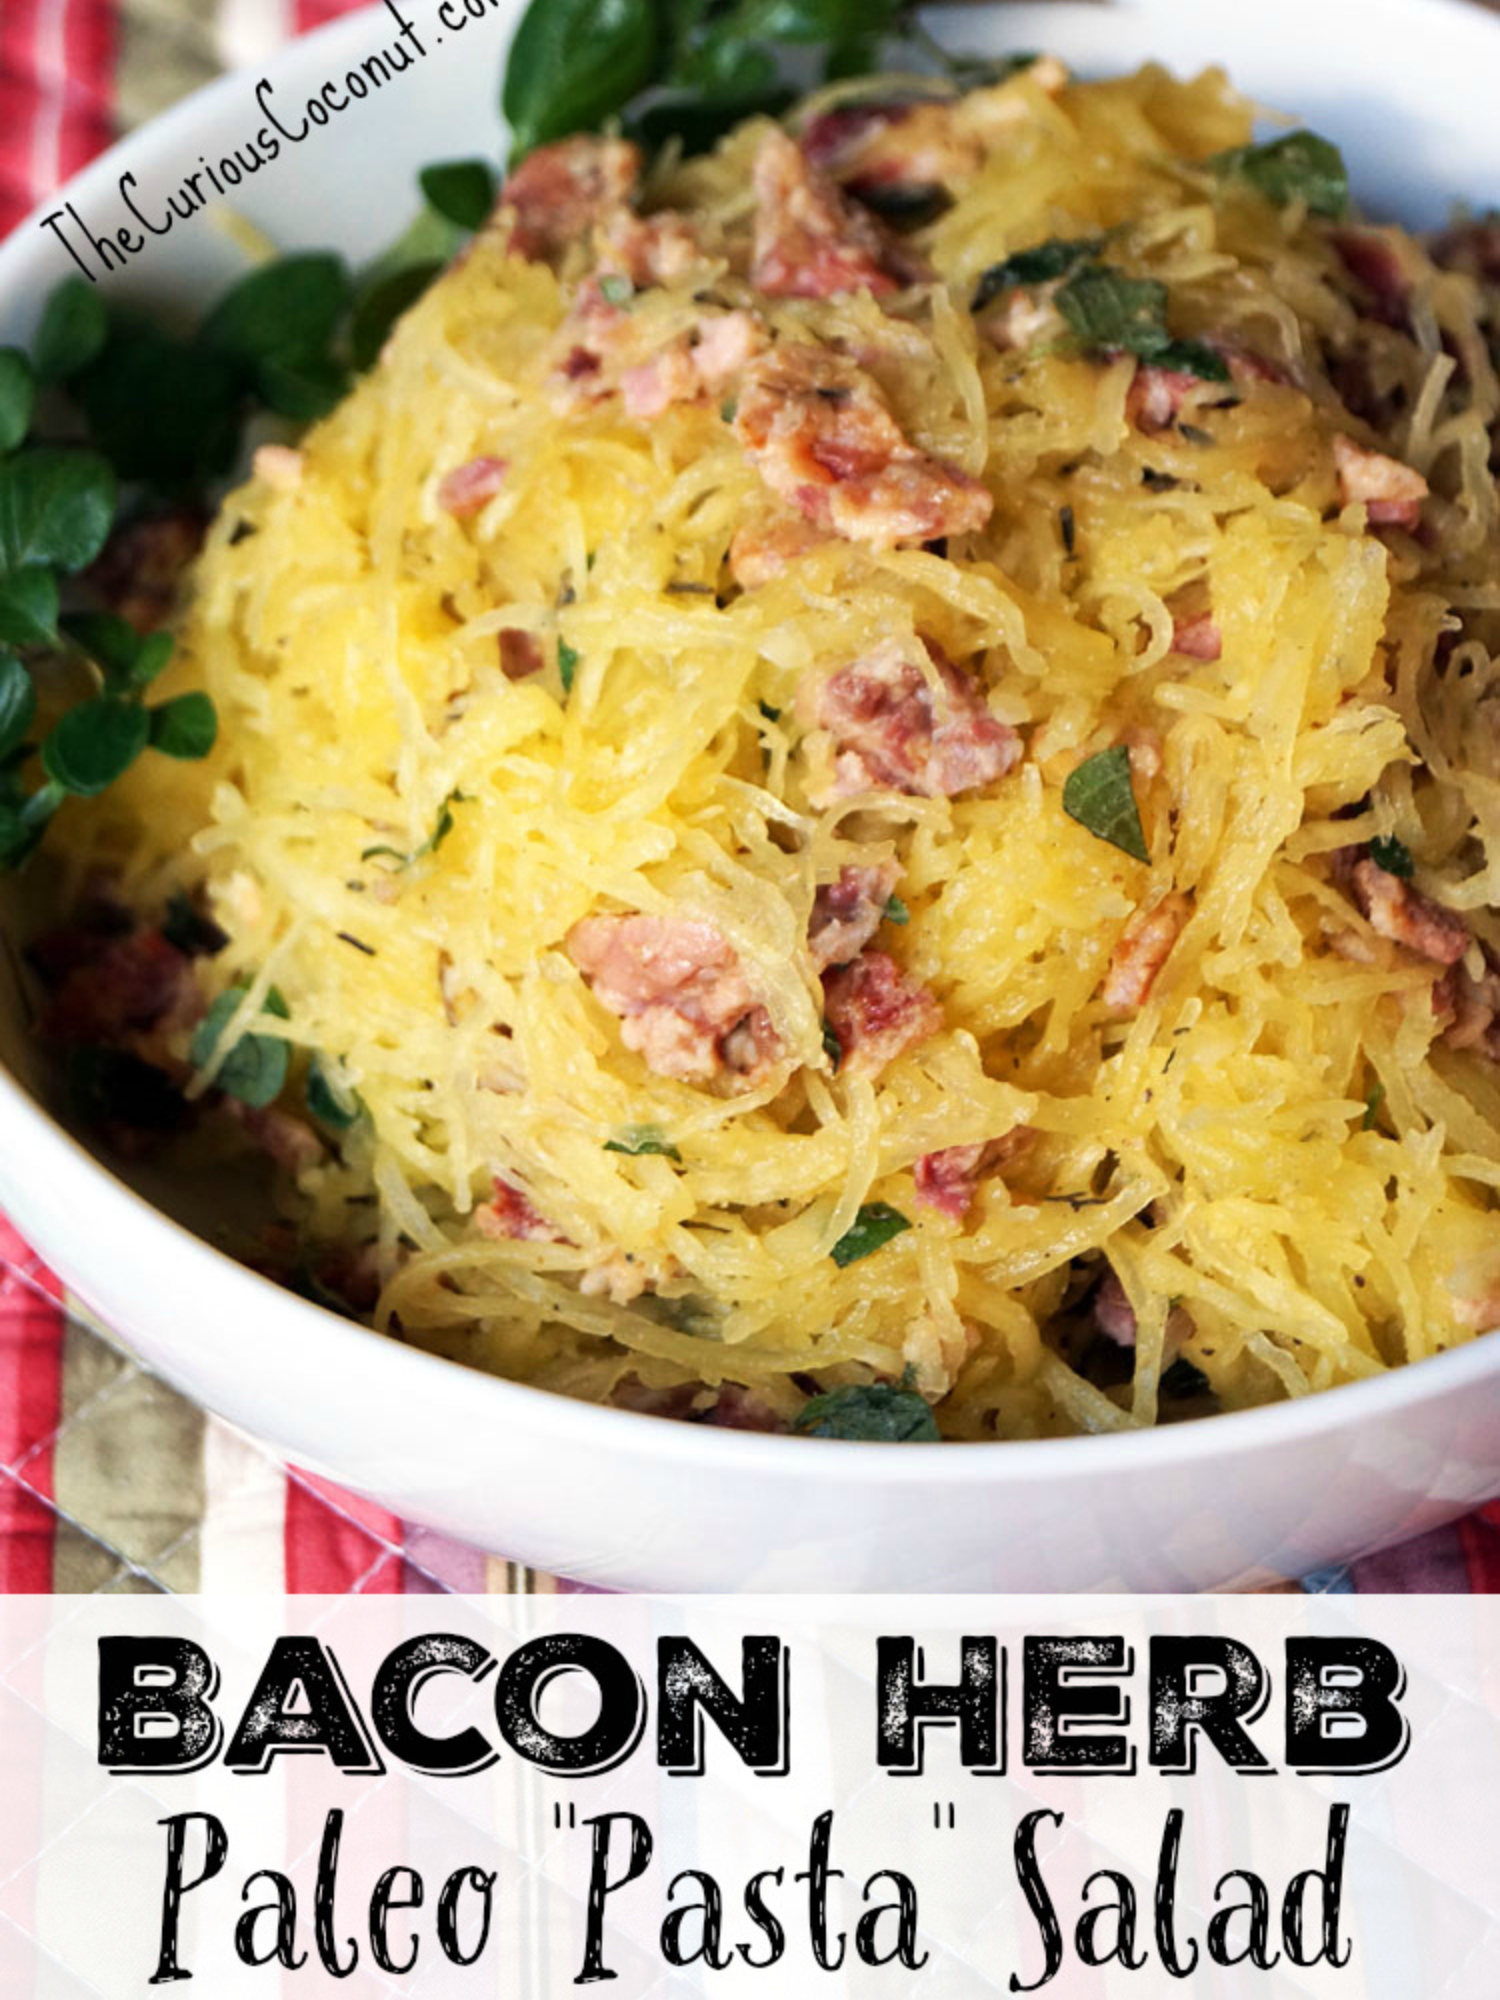 Title Image for Bacon Herb Paleo Pasta Salad showing a big bowl of this spaghetti squash salad